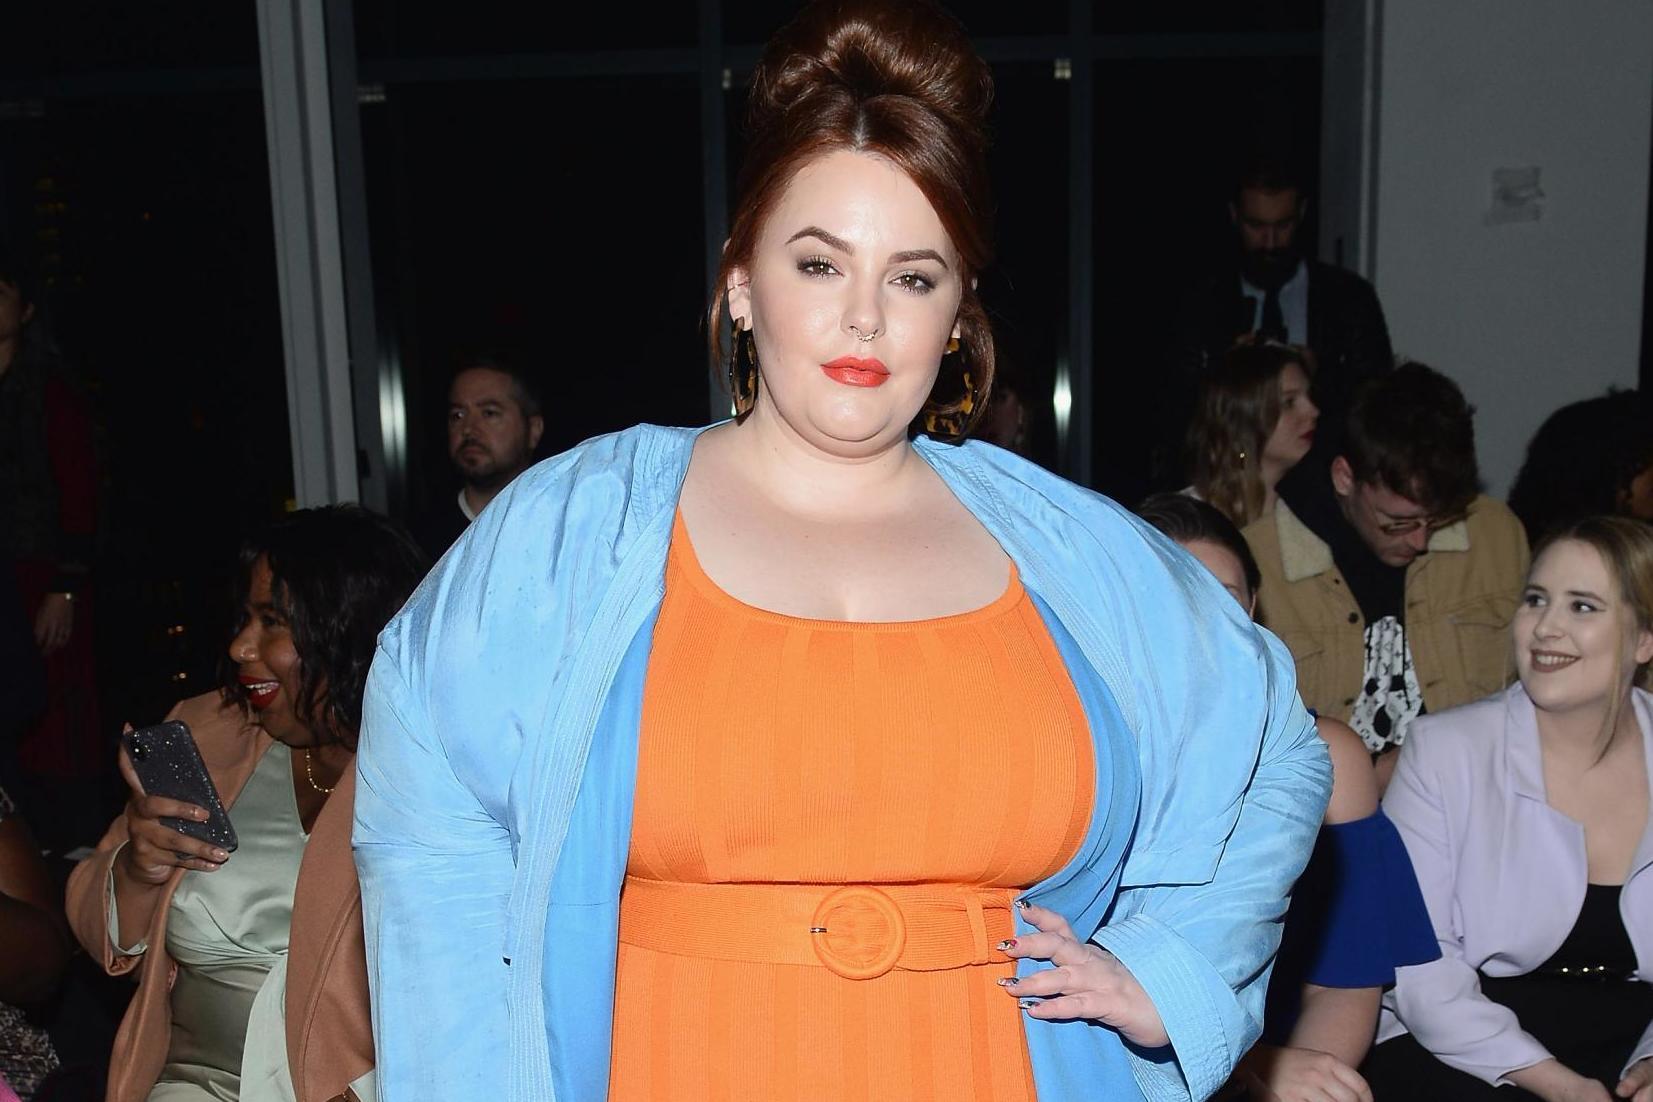 How Tess Holliday Changed the Body-Positivity Conversation [VIDEO]